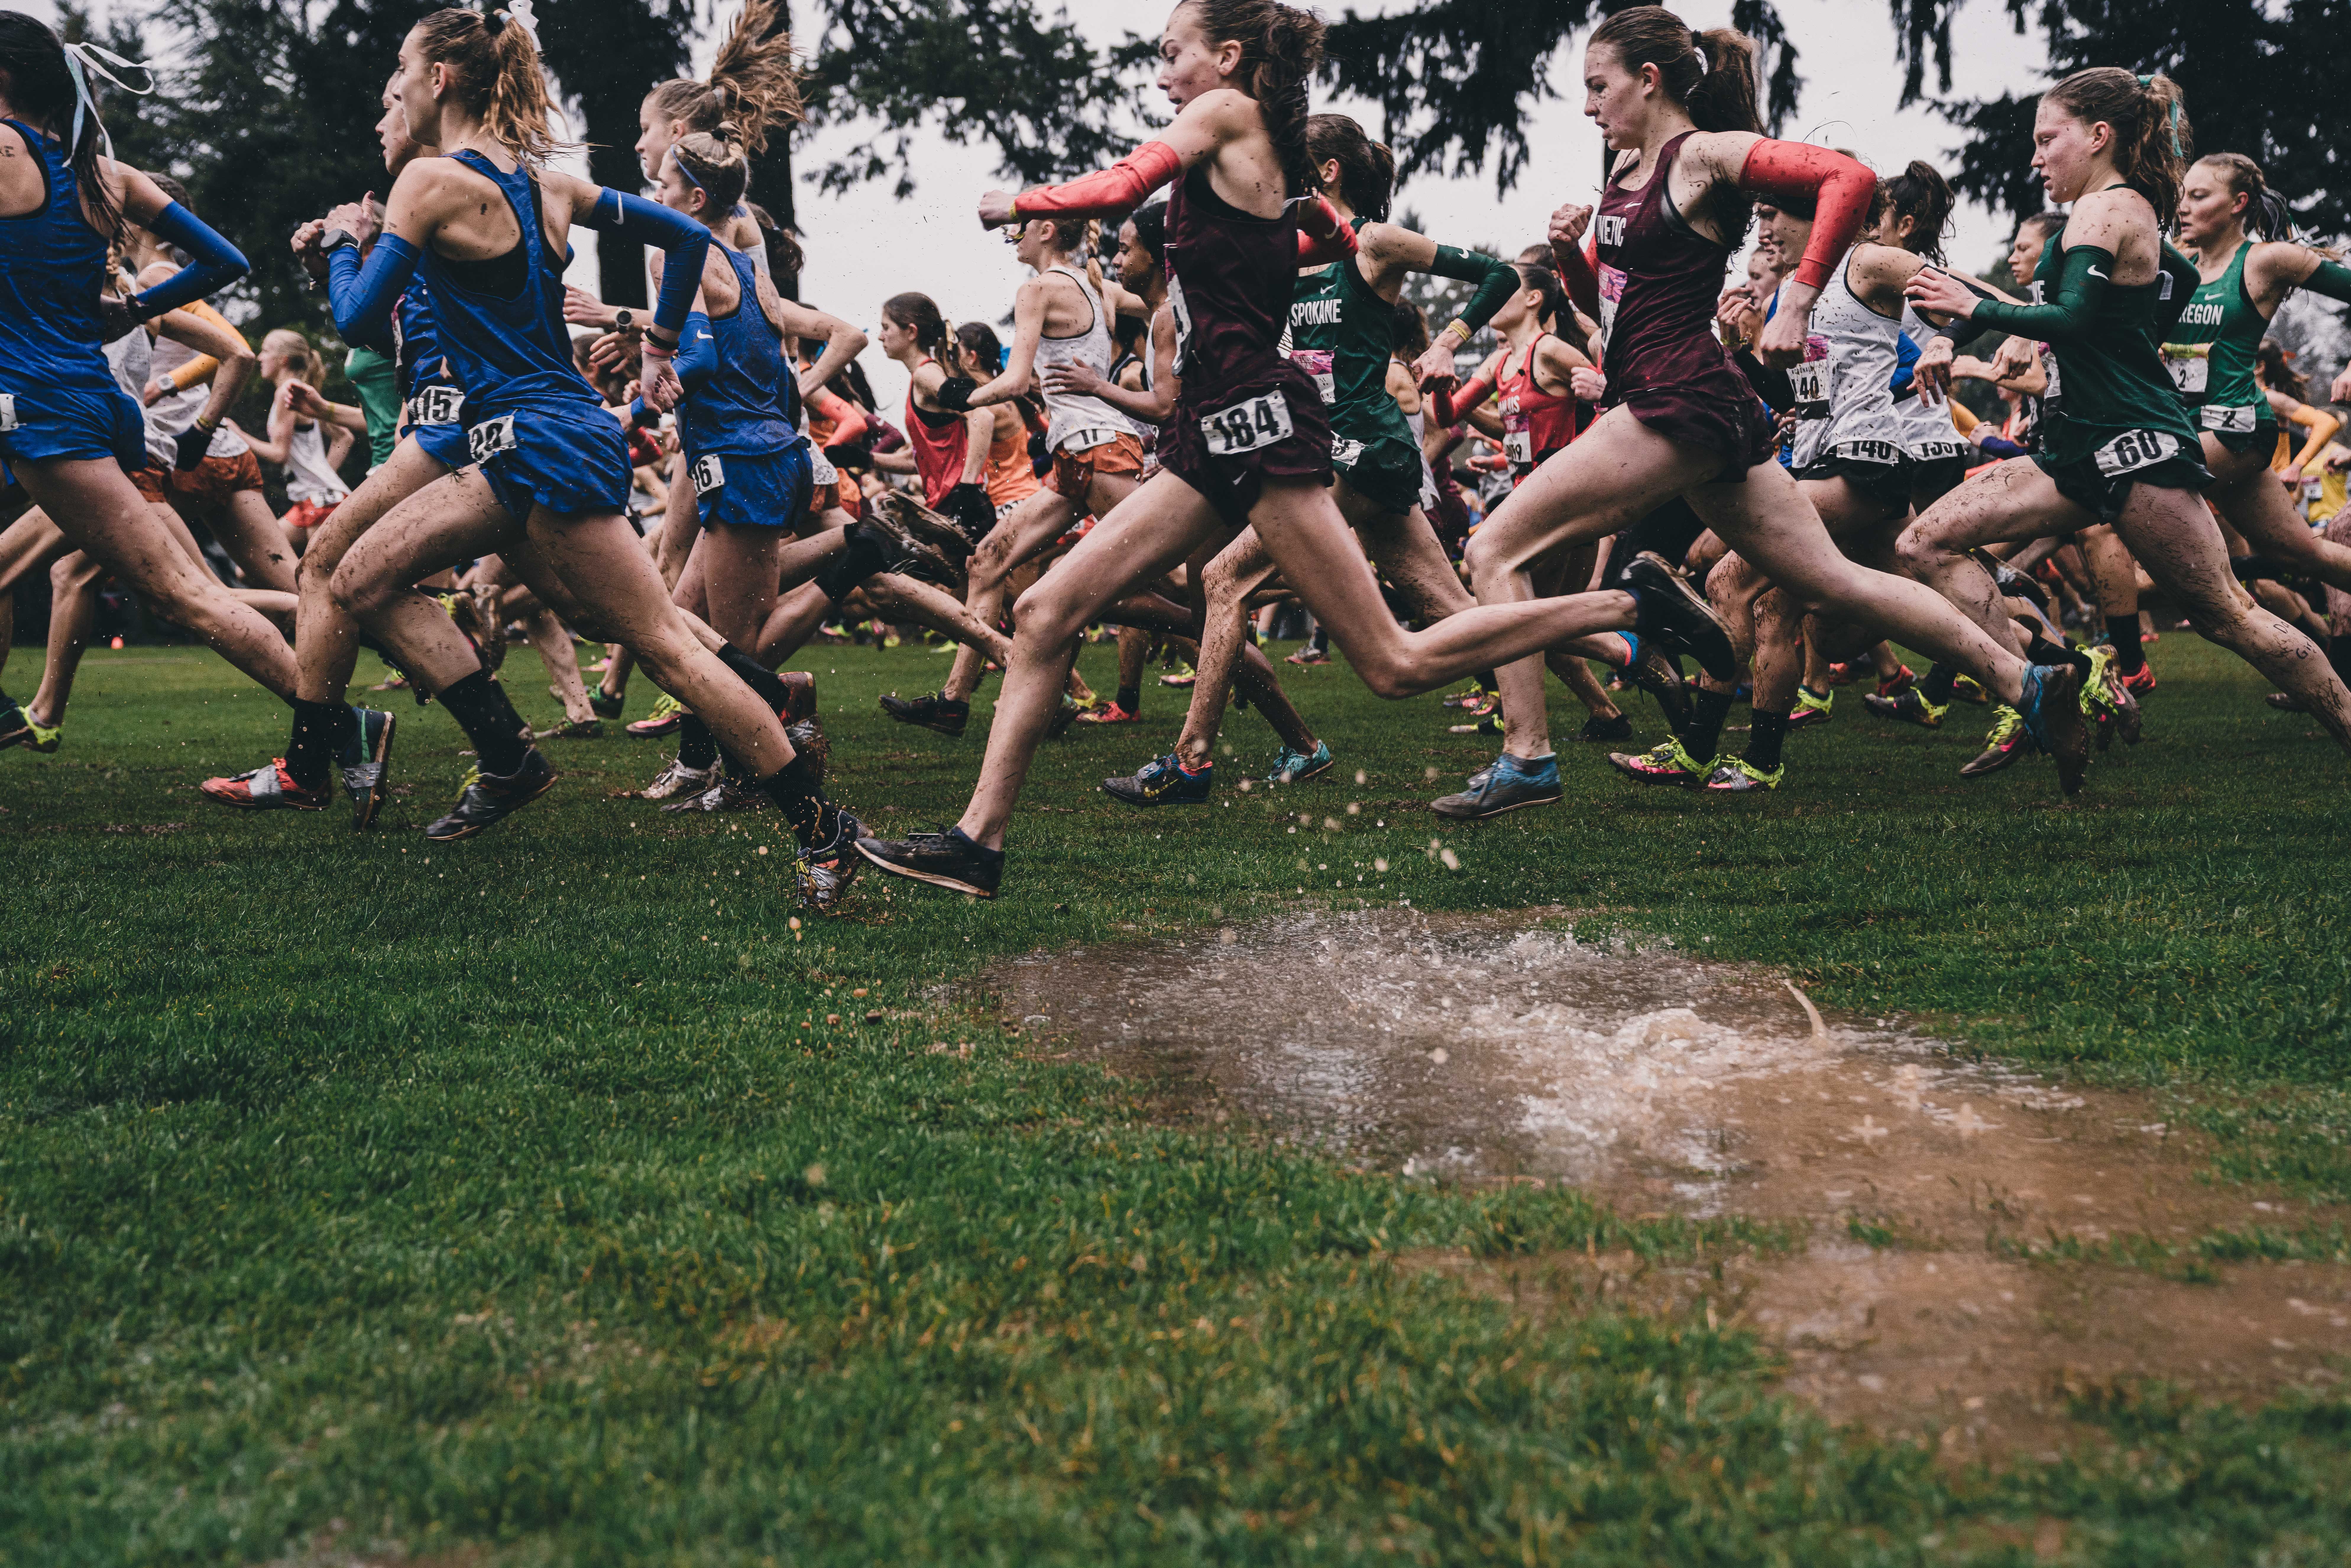 Scenes From Nike Cross Nationals